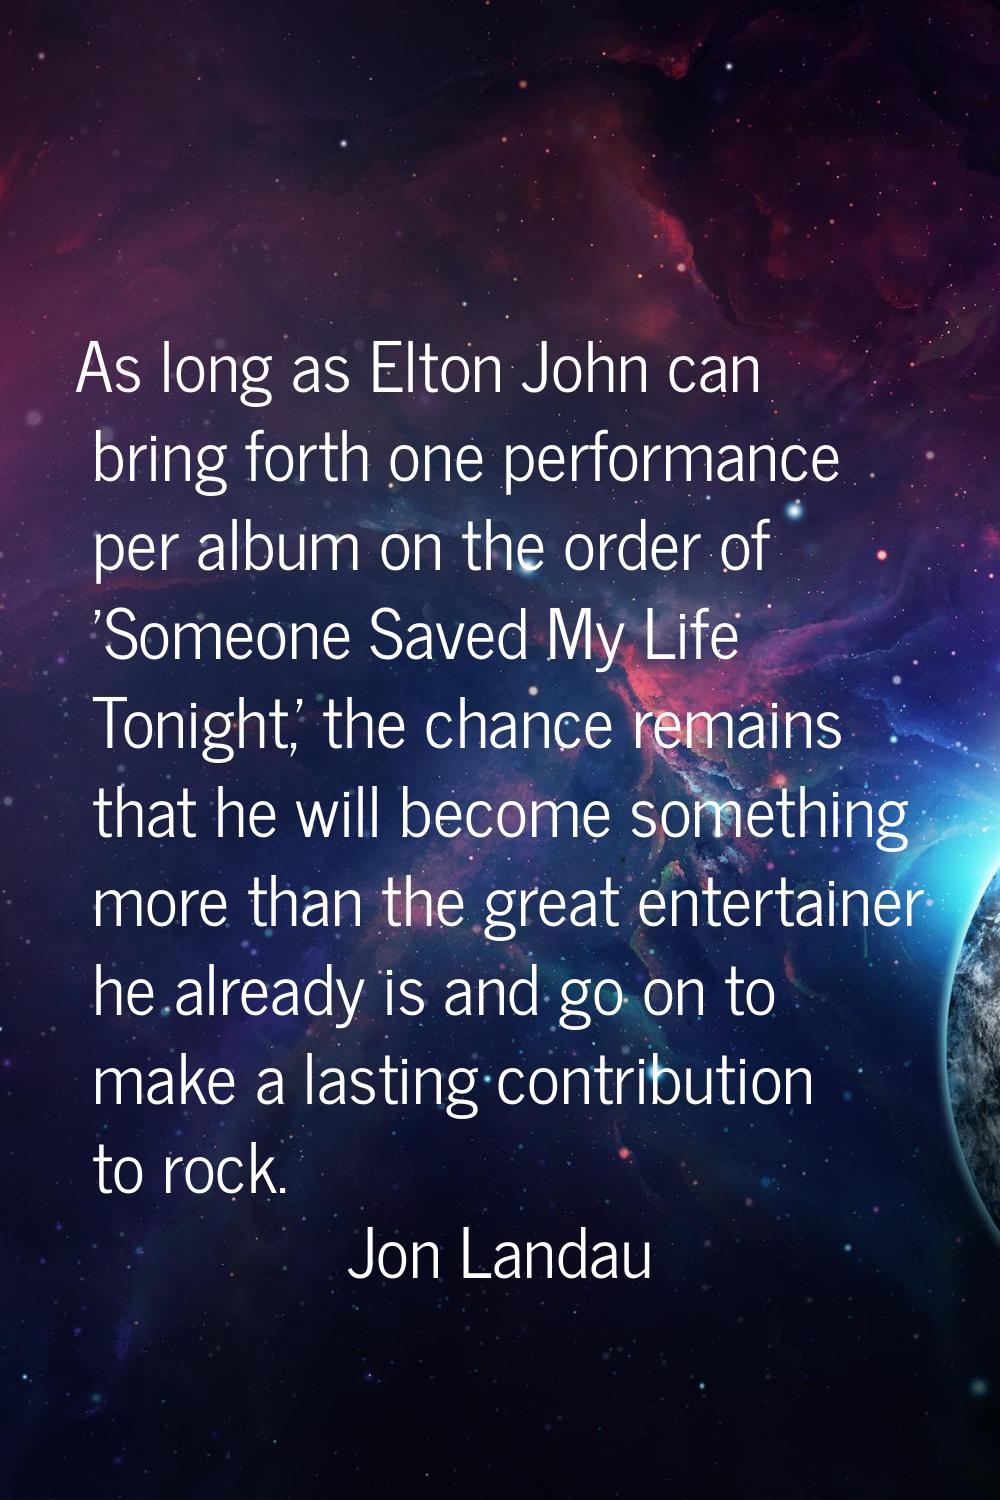 As long as Elton John can bring forth one performance per album on the order of 'Someone Saved My L